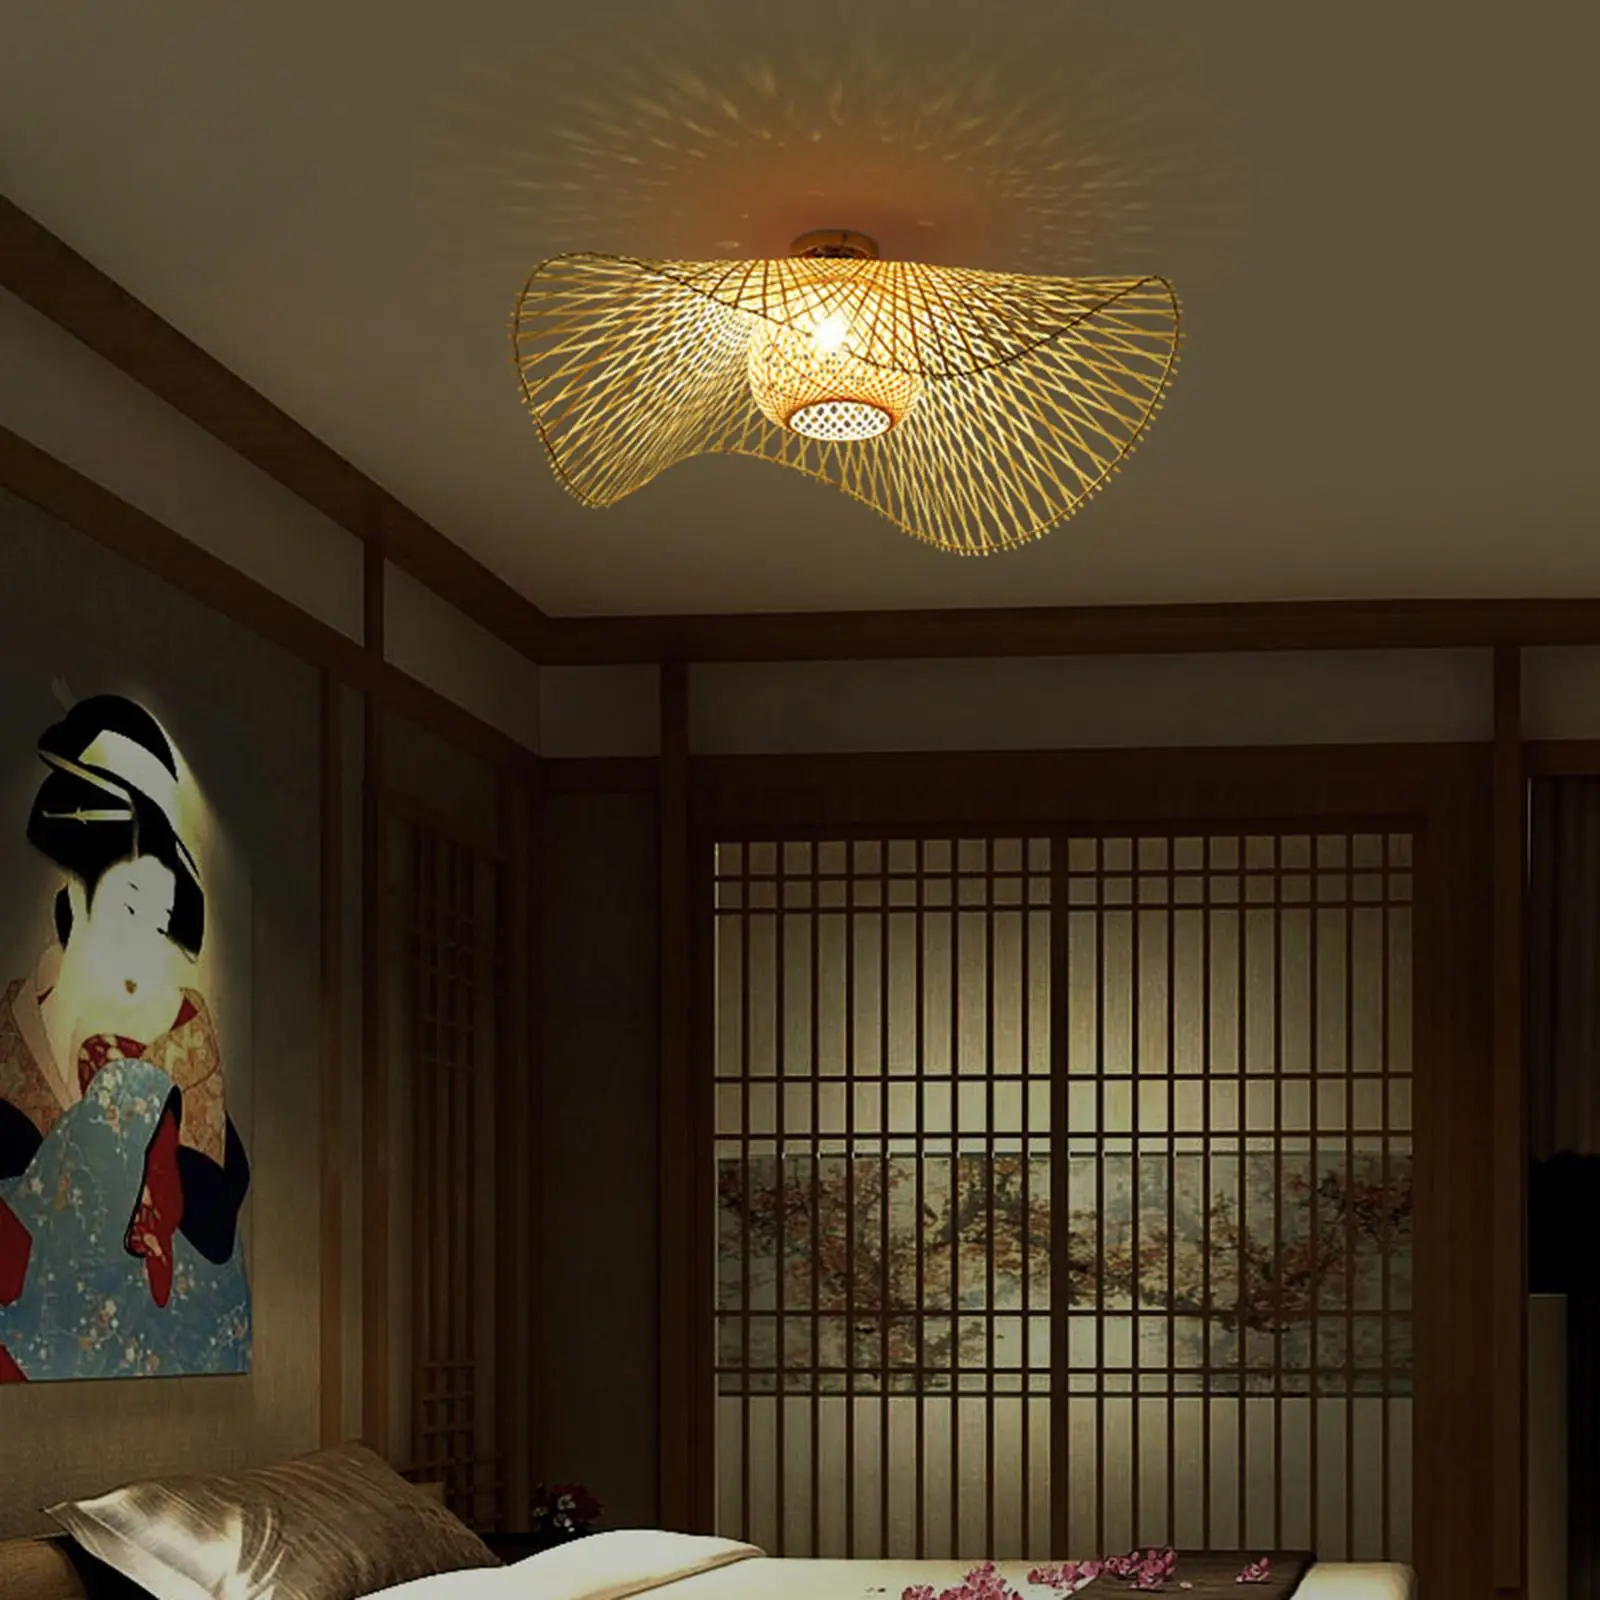 Bamboo Woven Ceiling Light 14 inch Flush Mount -Bulb (Not Included Hand-Woven)